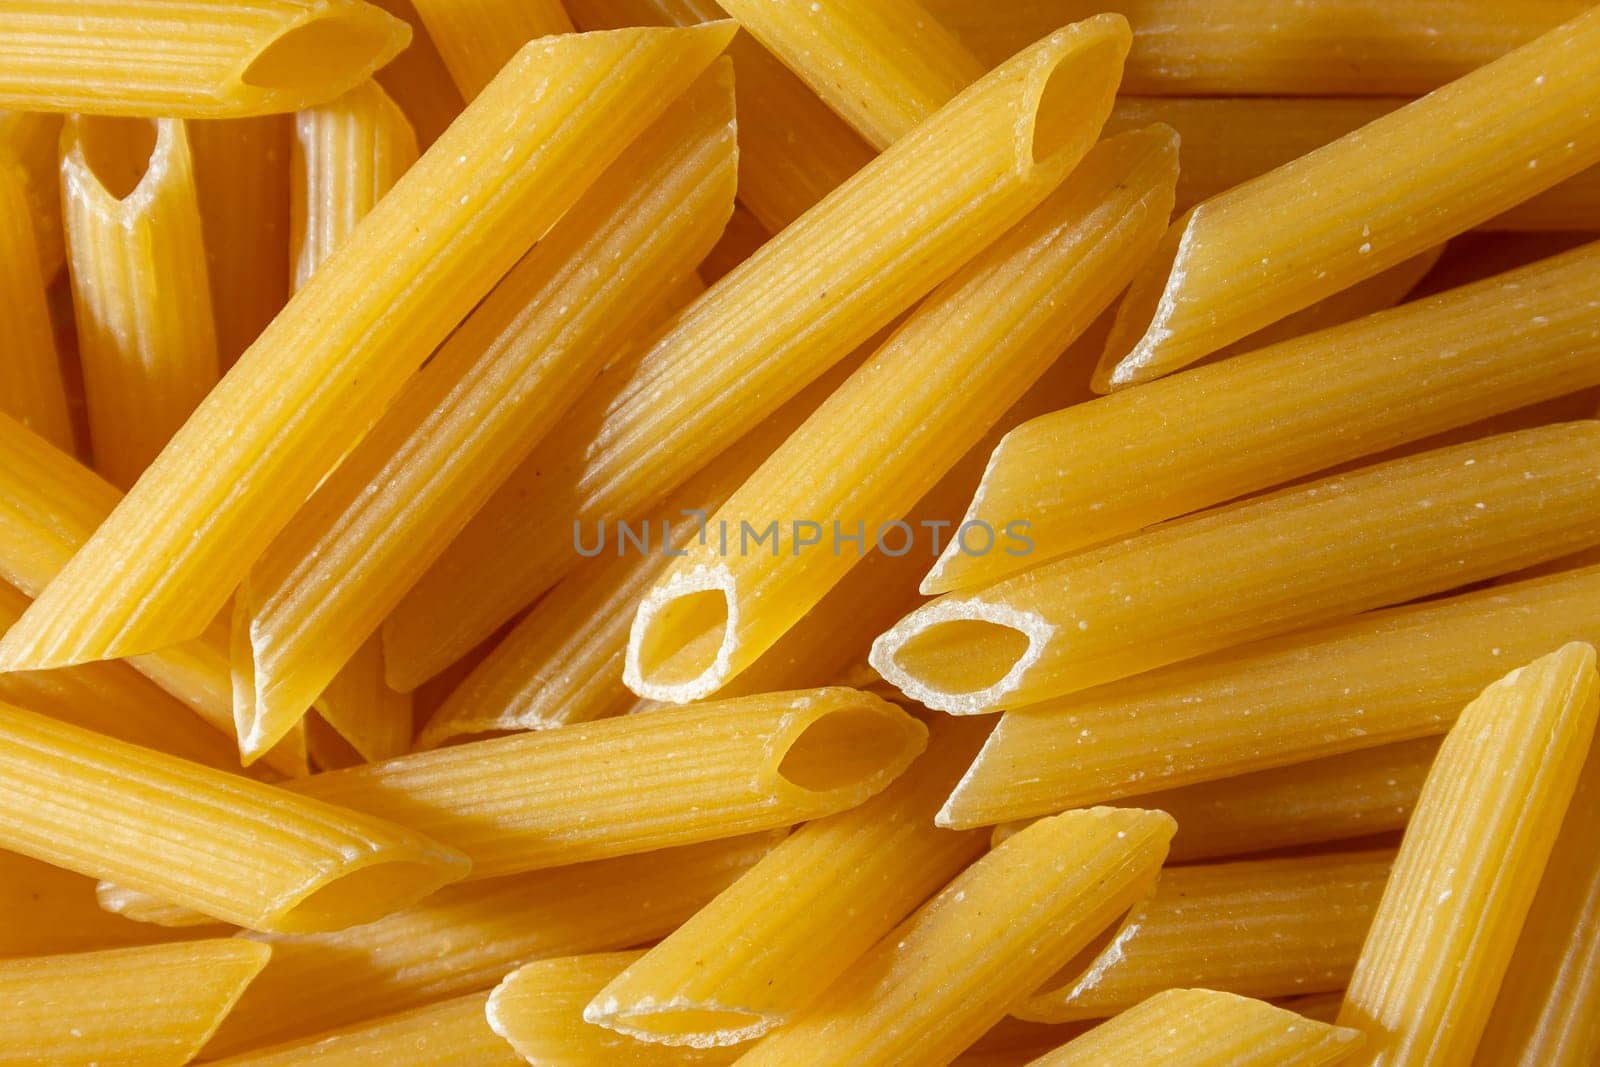 Uncooked Penne Rigate Pasta: A Culinary Canvas of Penne Macaroni, Creating a Lively and Textured Background for Gourmet Cooking. Dry Pasta. Raw Macaroni - Top View, Flat Lay